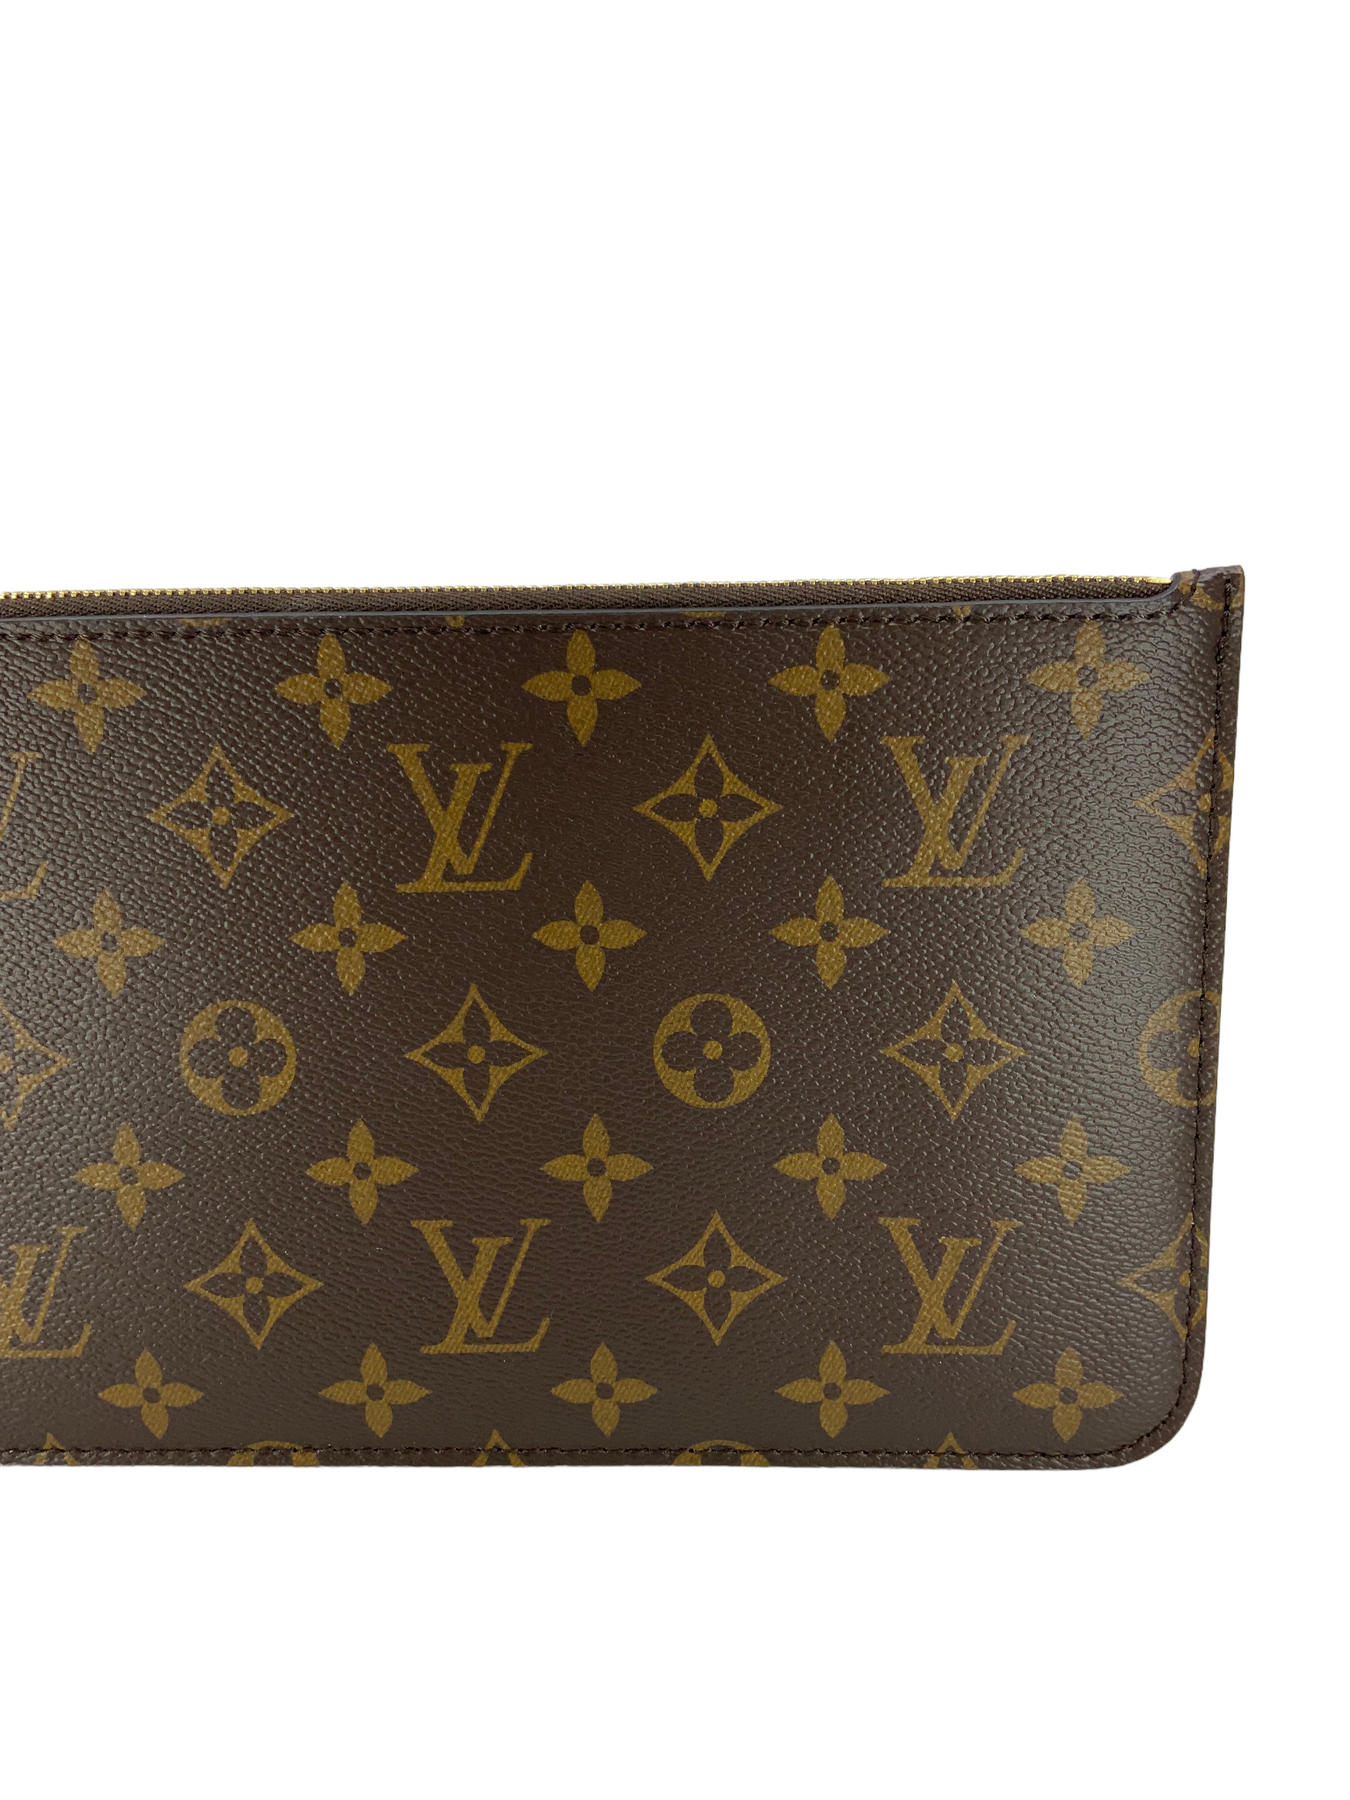 Louis Vuitton Monogram Teddy Neverfull MM Tote bag with Pouch